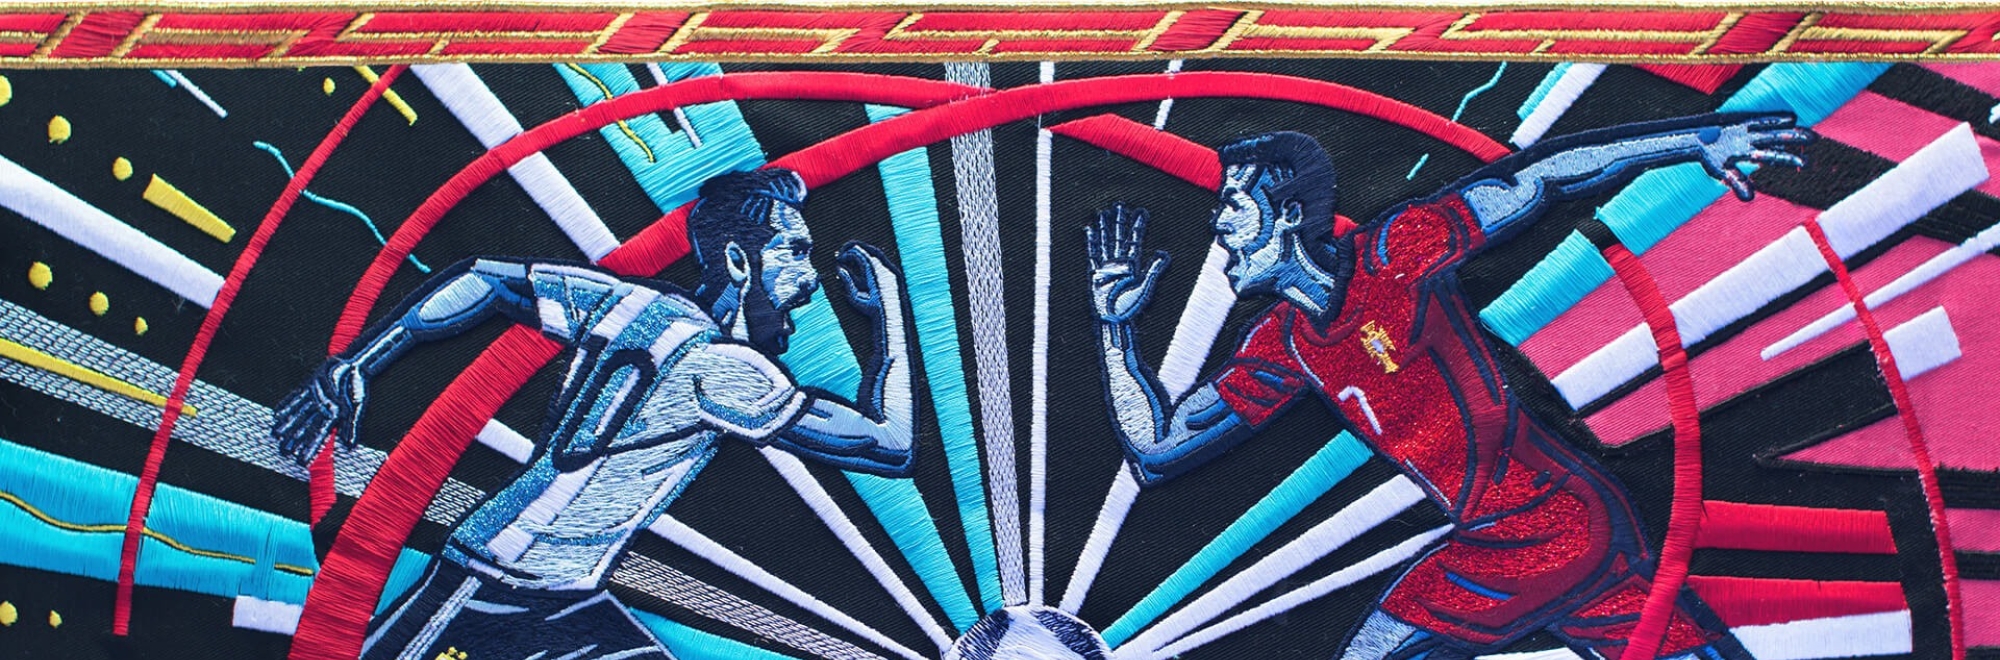 Did the BBC's World Cup "History Will Be Made" tapestry score creatively?